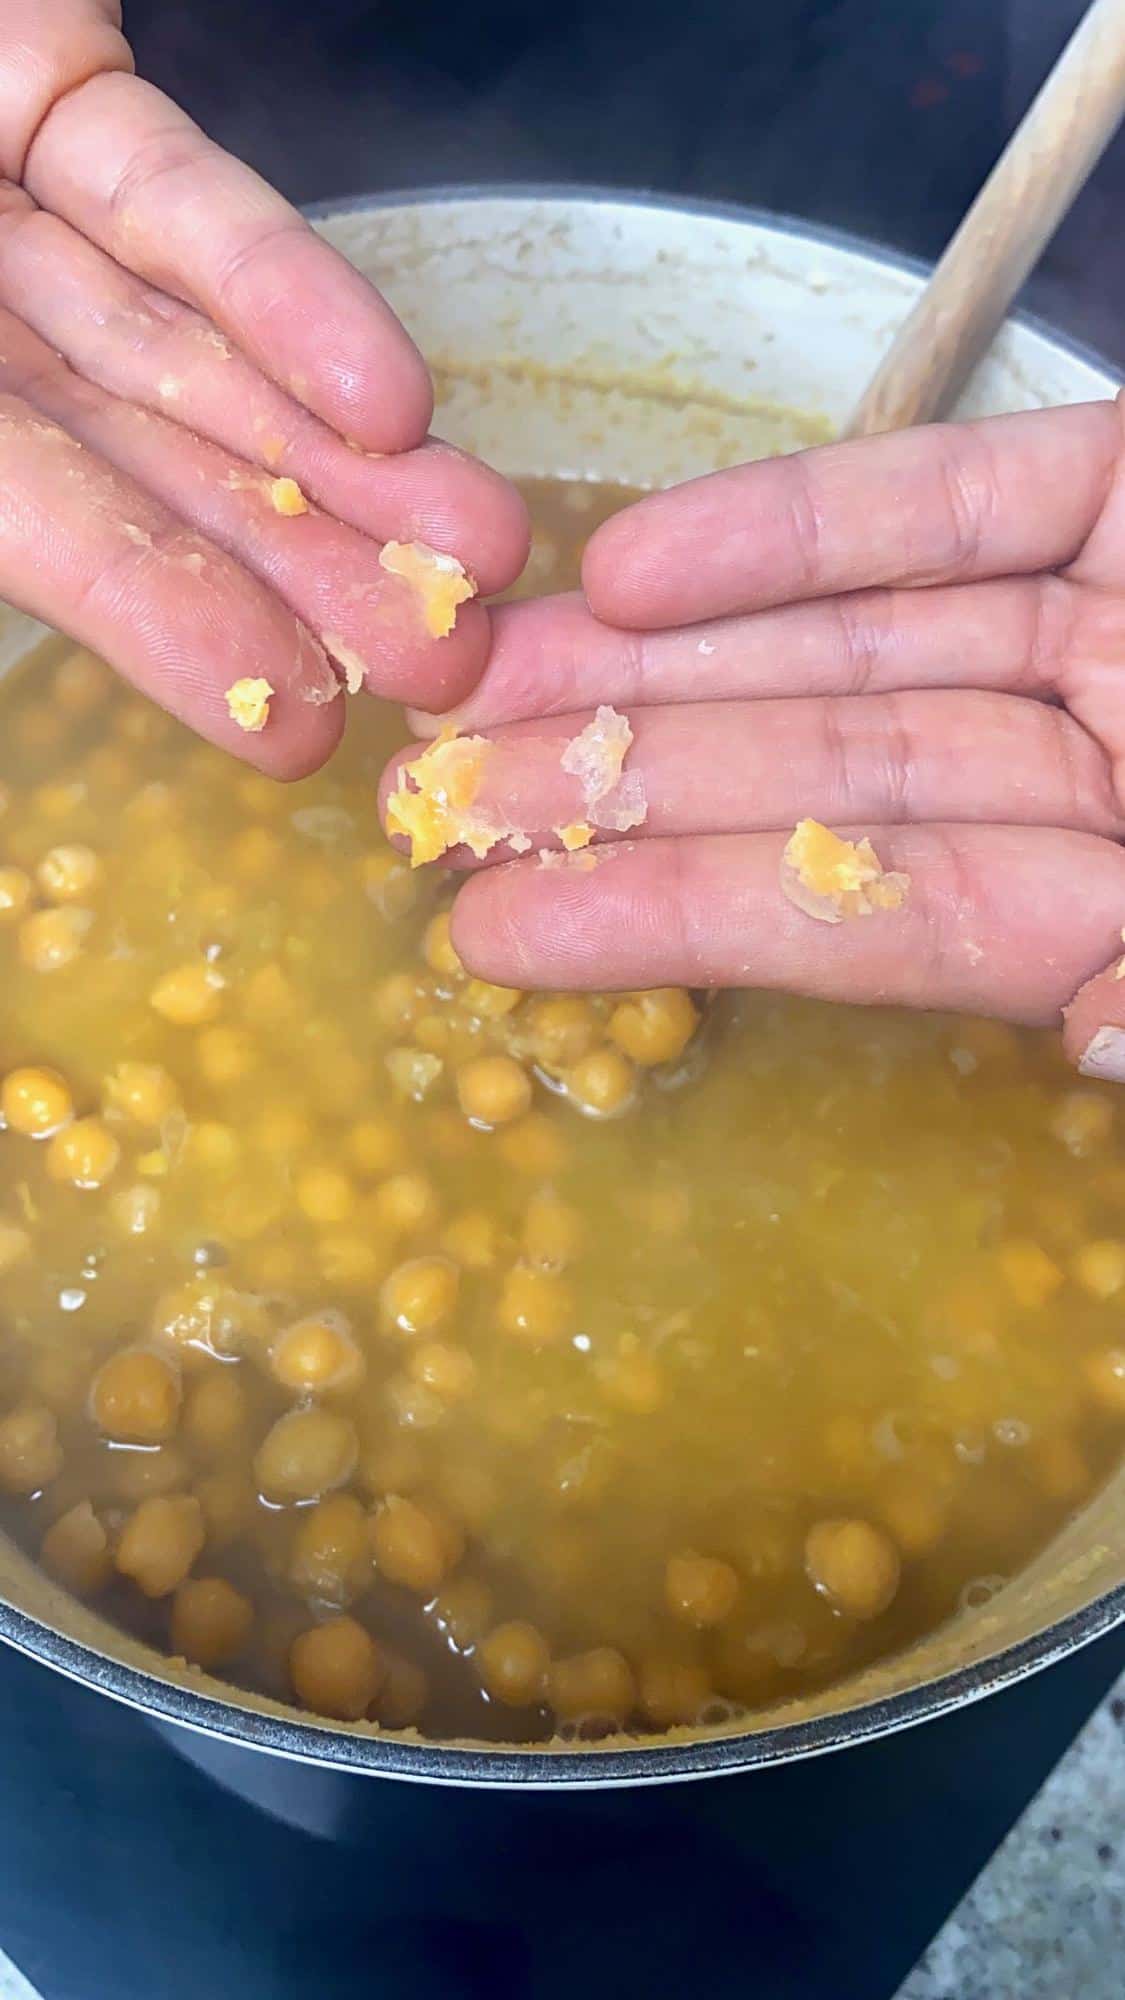 Showing softness of boiled chickpeas by smashing them with fingers